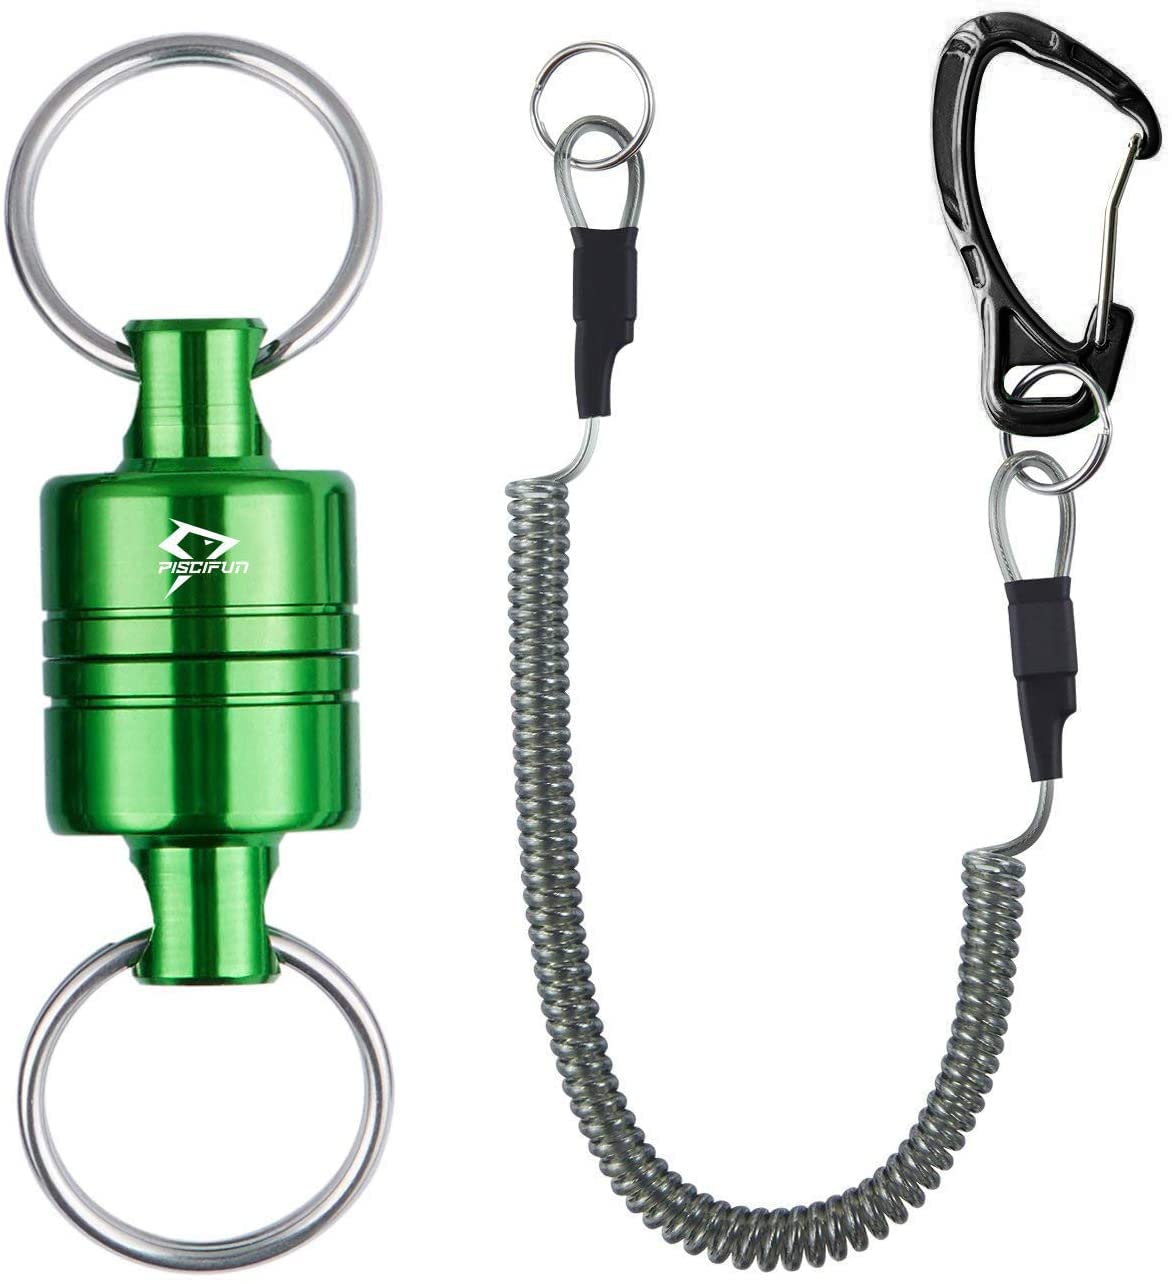 Piscifun Magnetic Net Release for Fly Fishing Magnetic Release